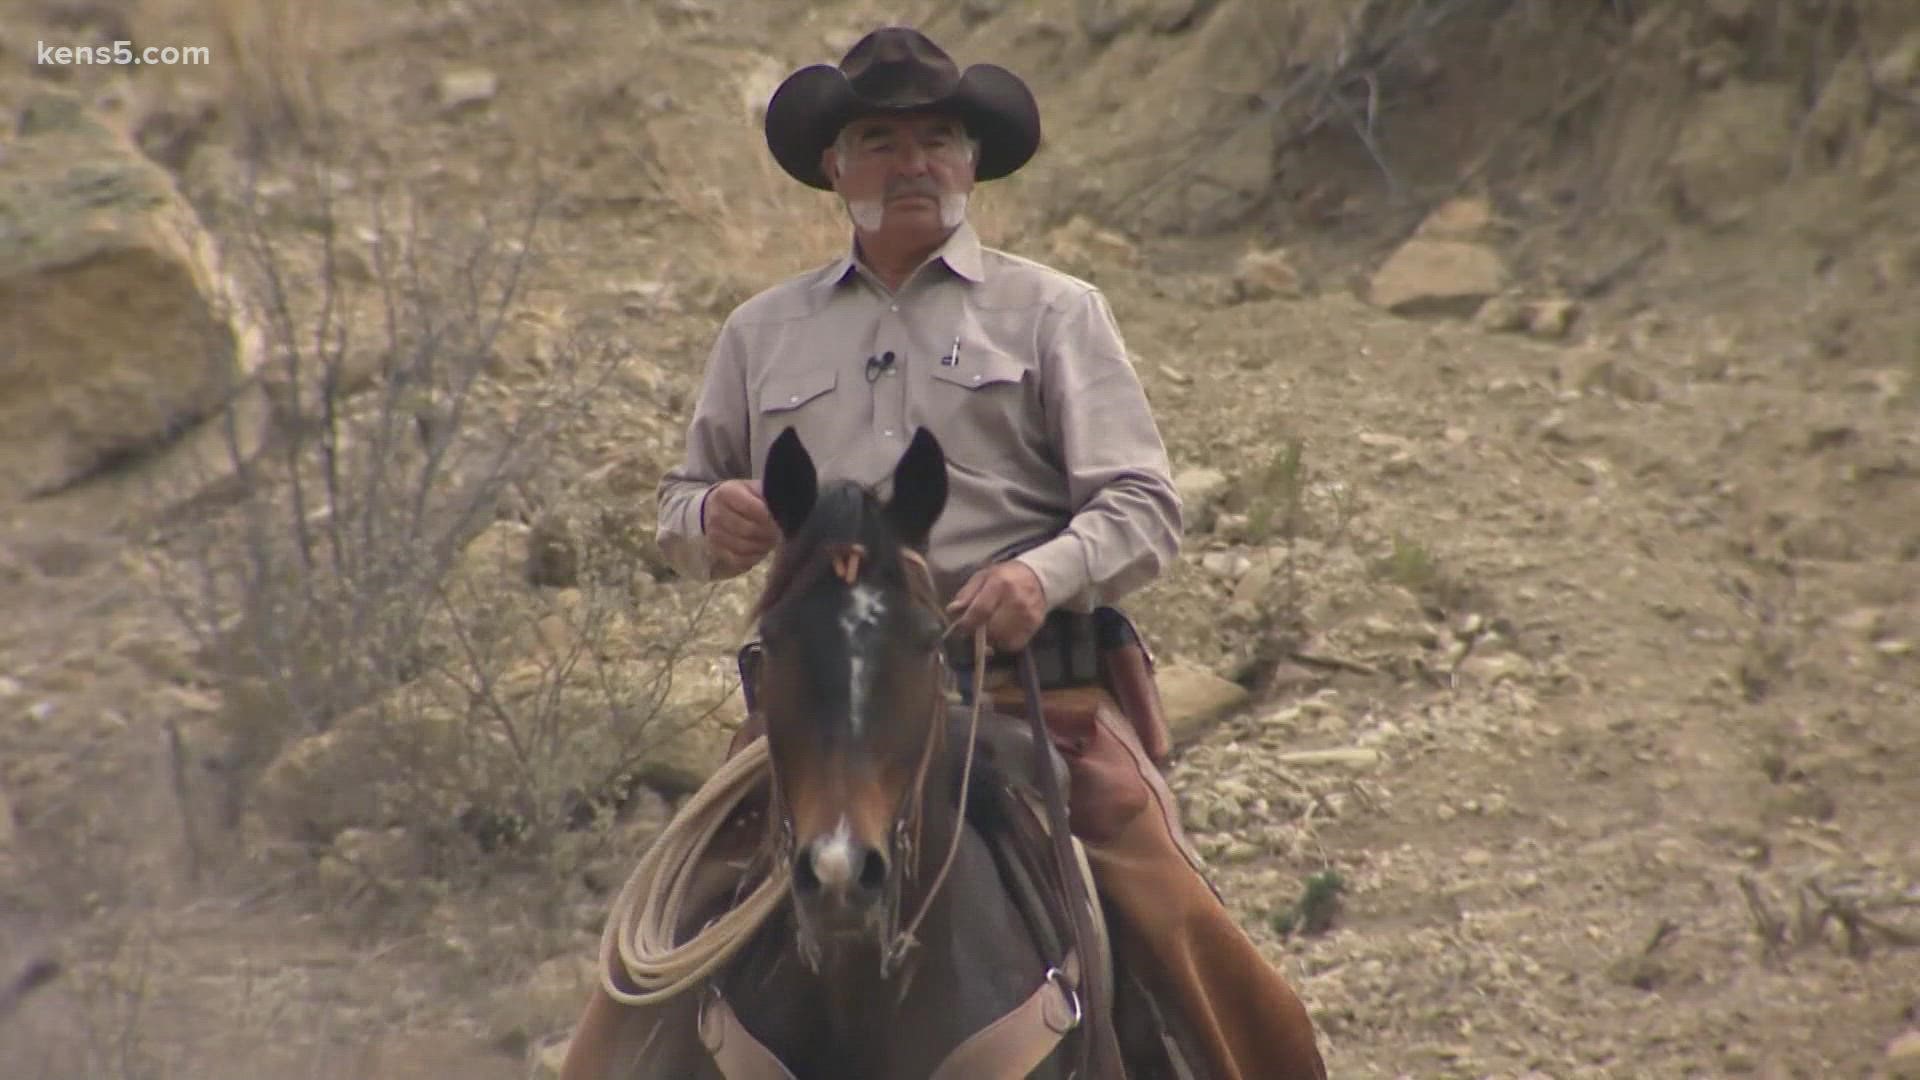 These men on horseback monitor the Rio Grande along the U.S.-Mexico border. But it isn’t people they’re looking for.